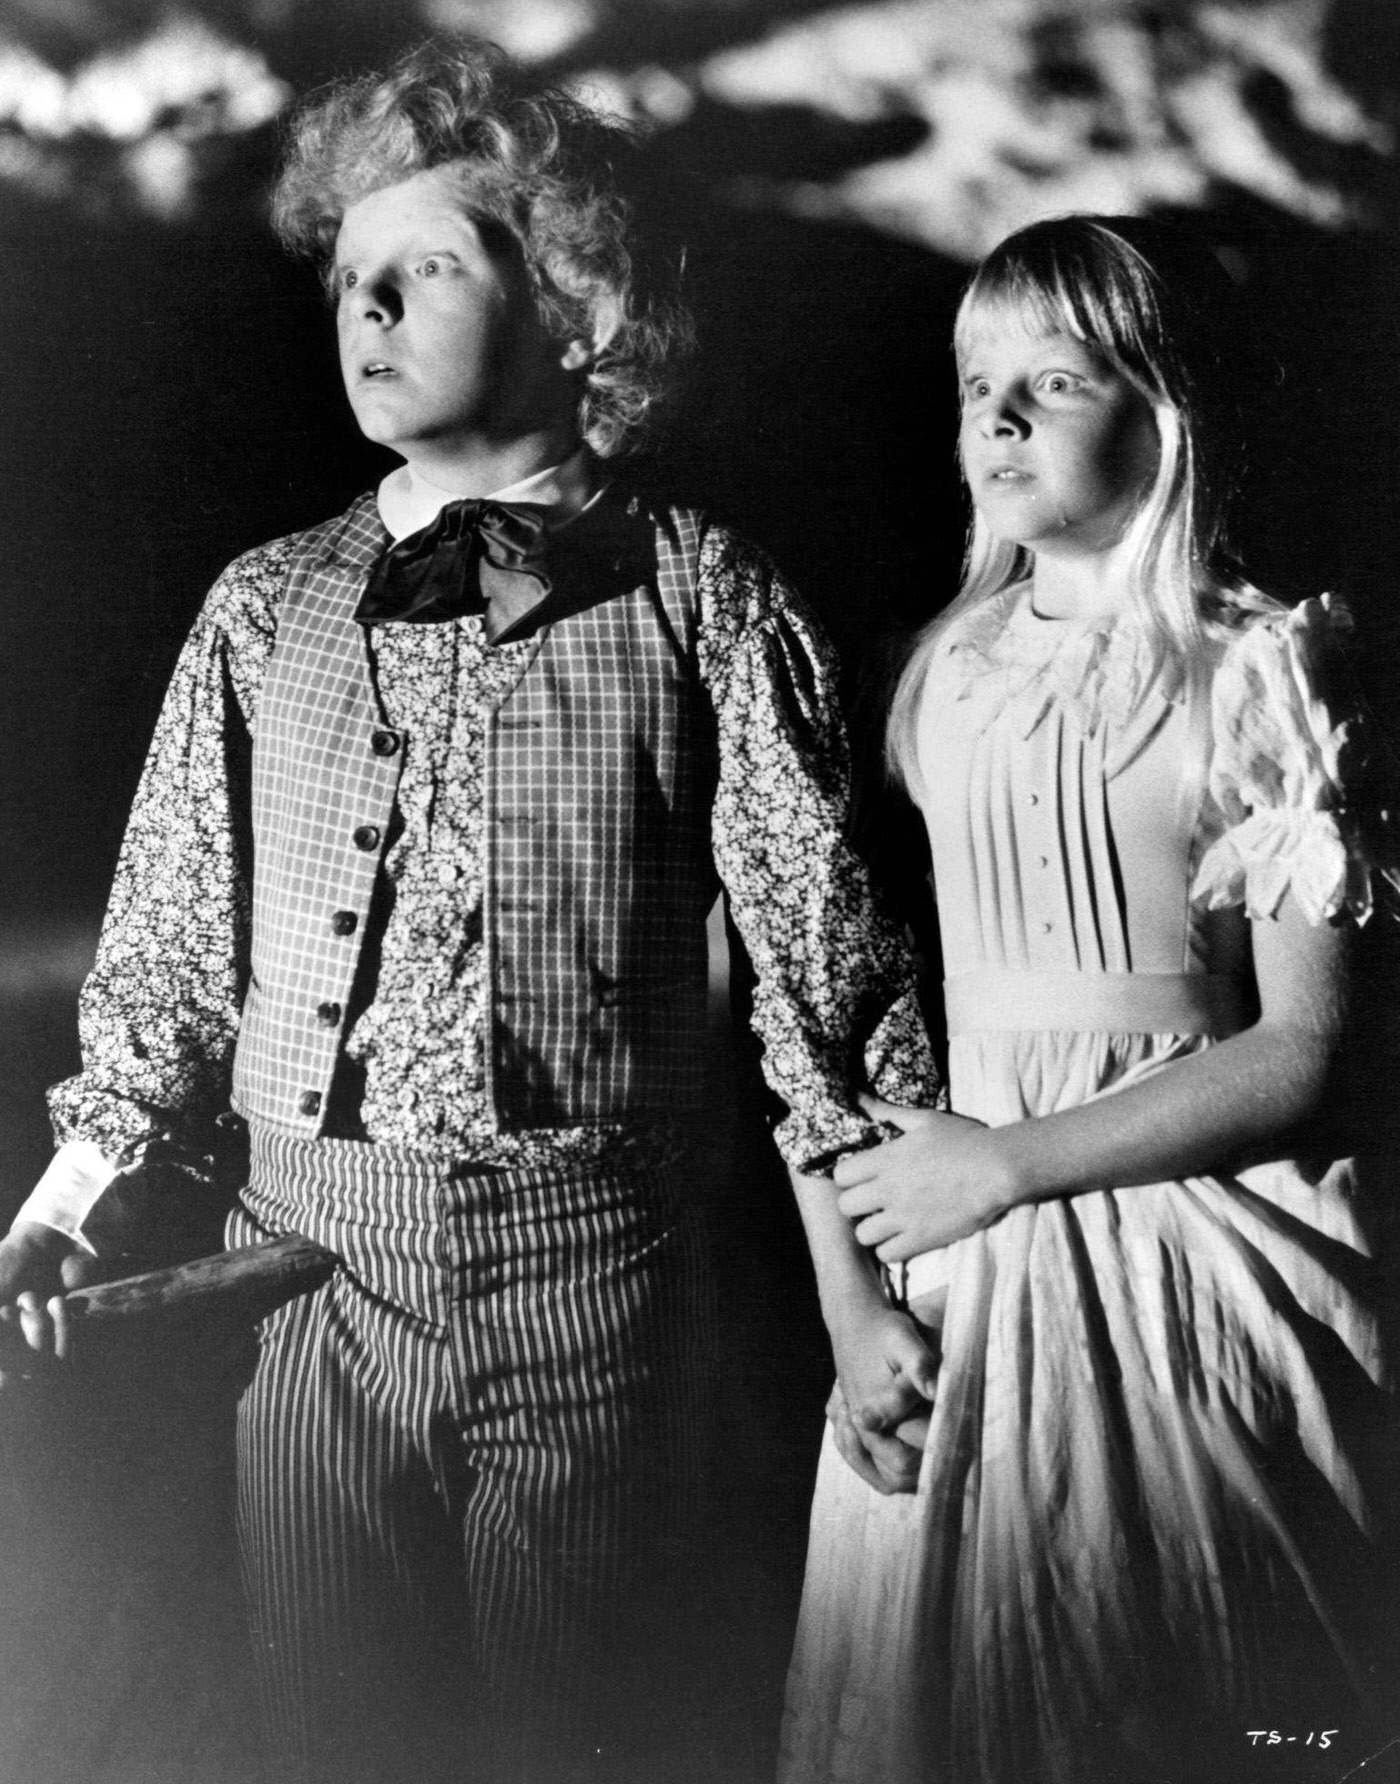 Johnny Whitaker and Jodie Foster with stunned looks in 'Tom Sawyer', 1973.